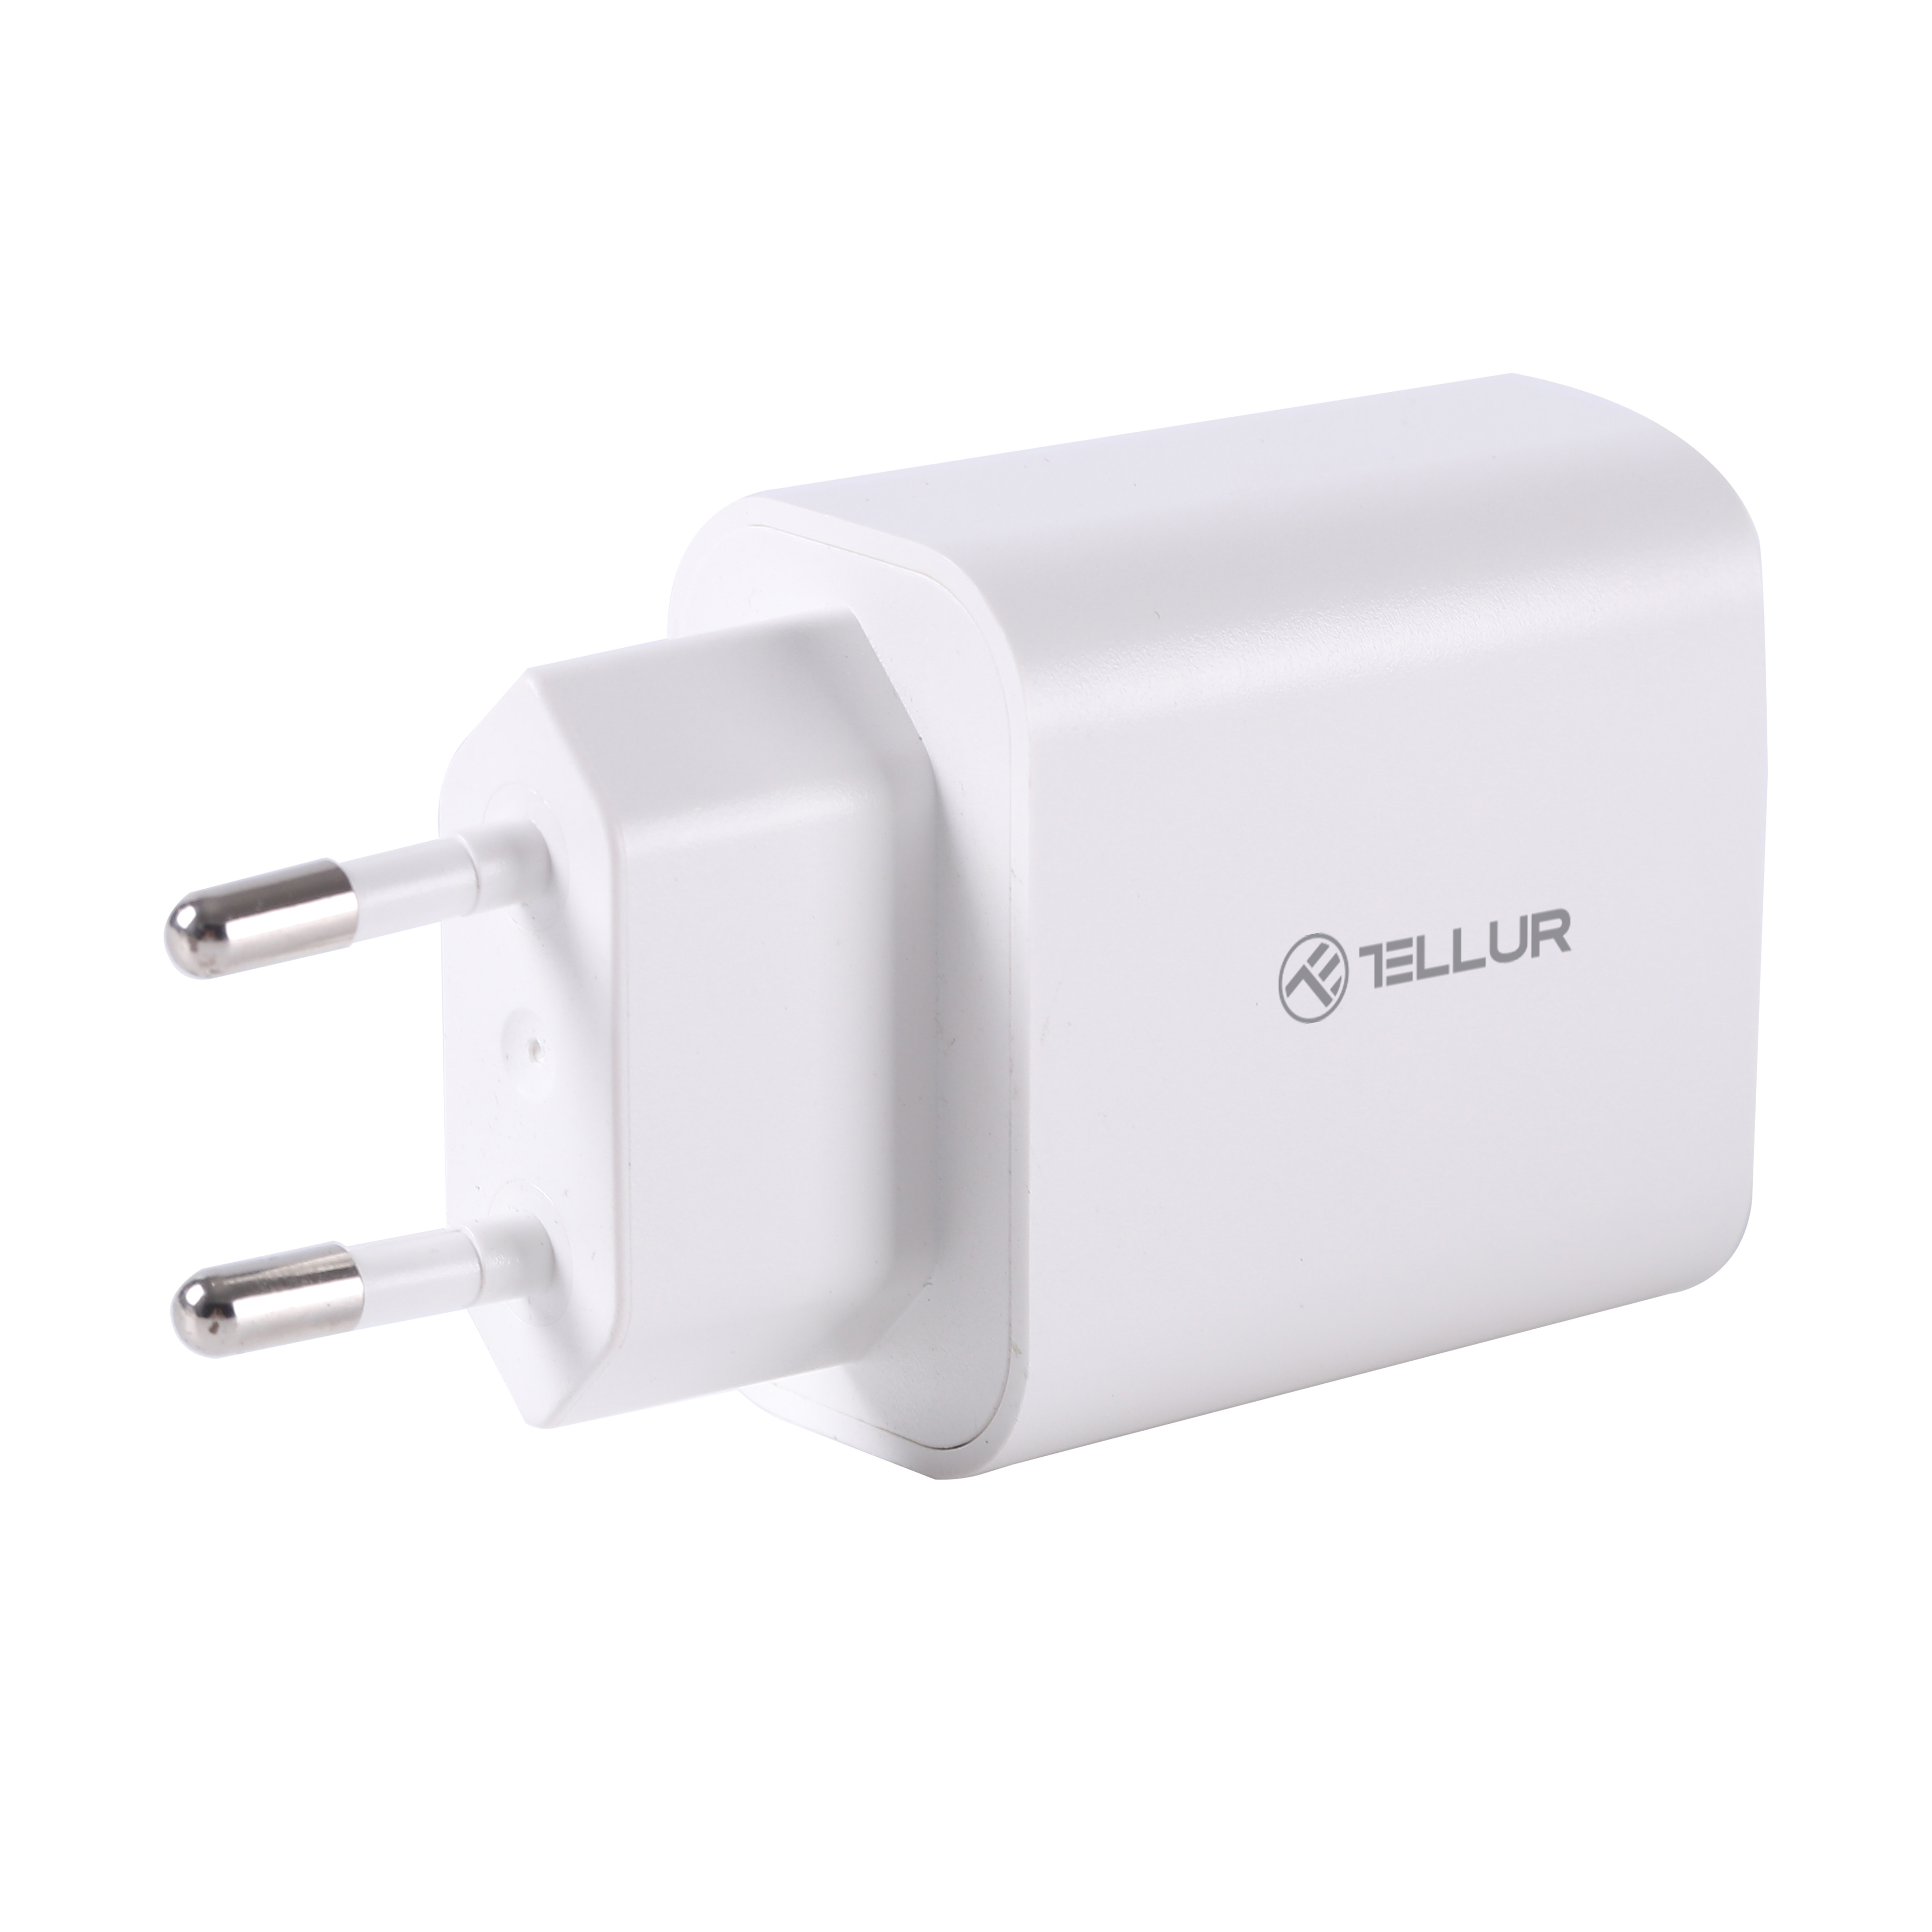 Huawei, TELLUR PDHC101 Black Apple, Charger Samsung,